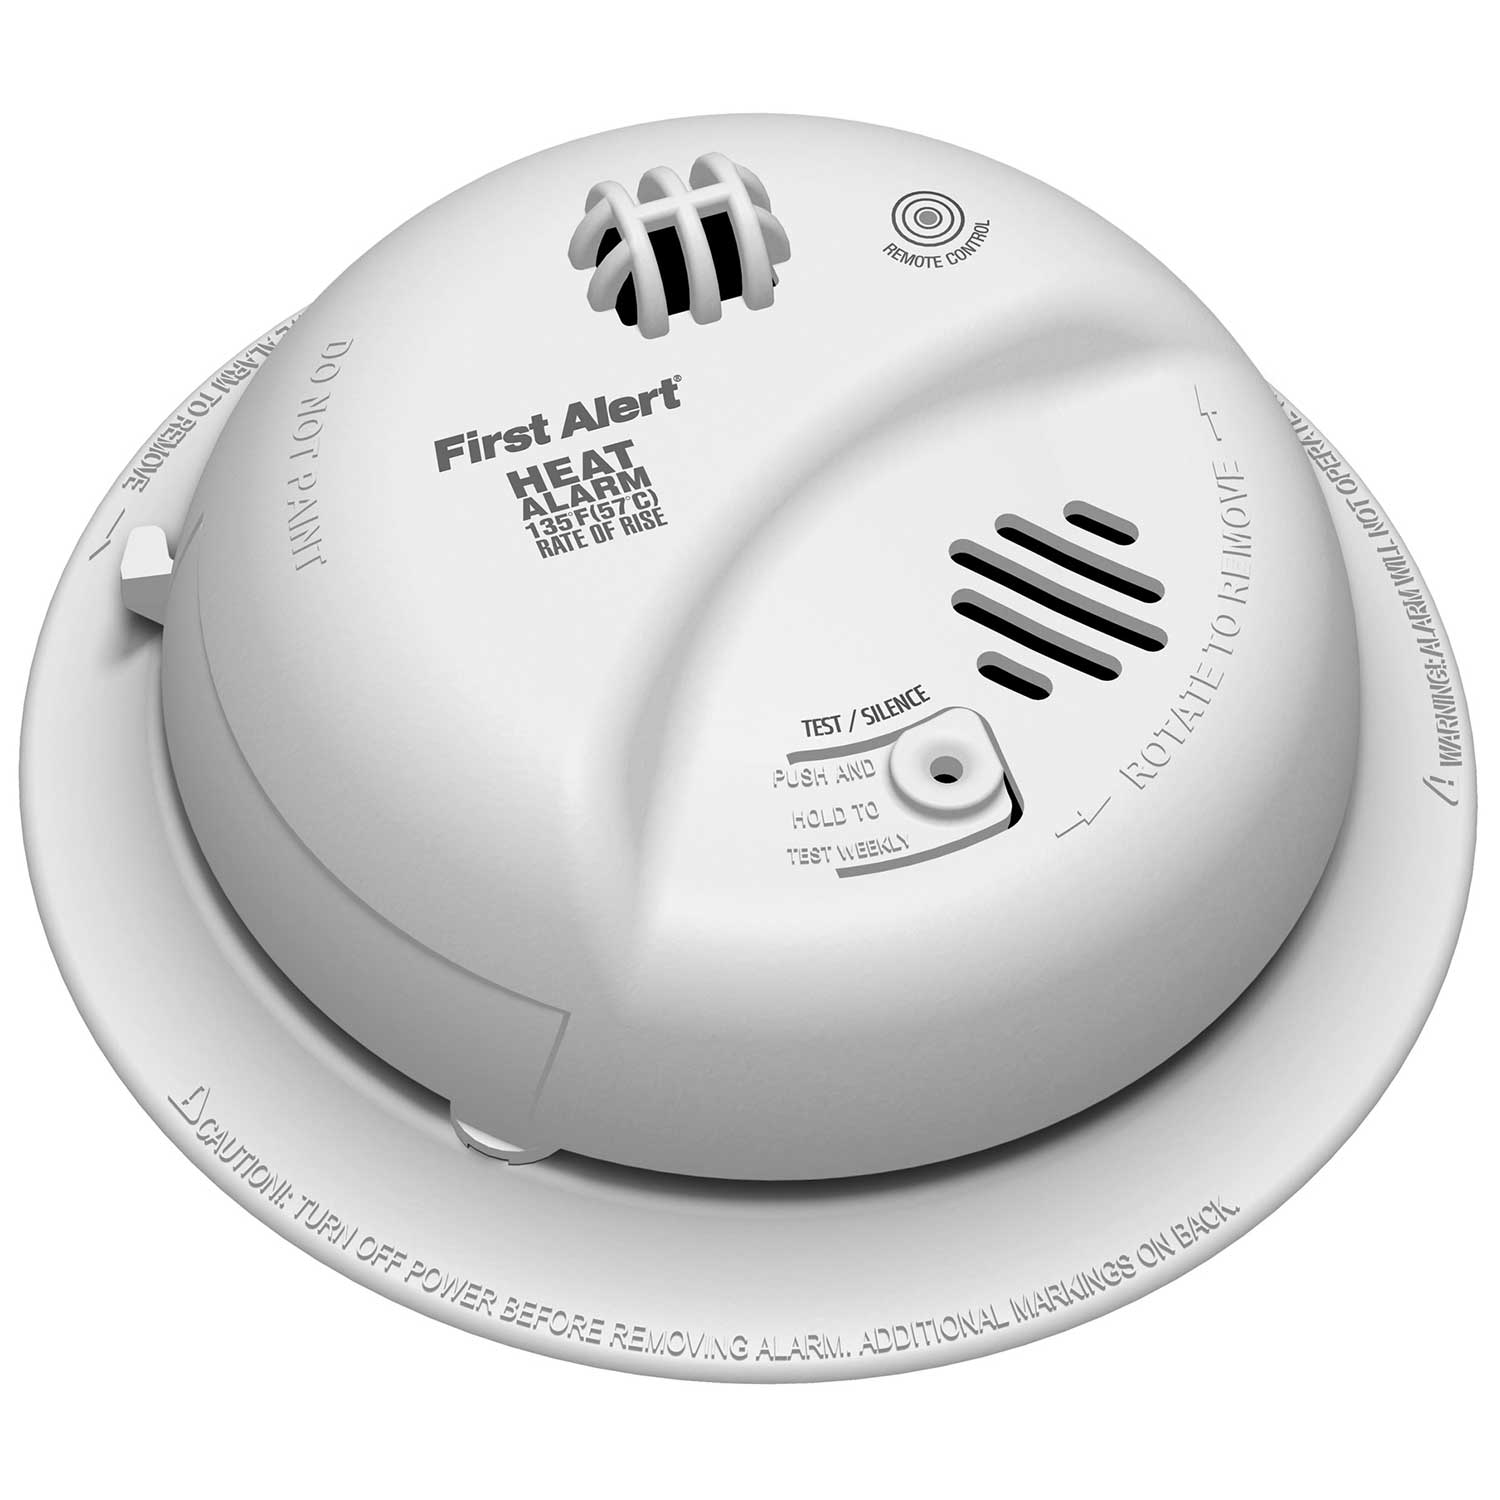 Heat Alarm Detector 240v Mains Hard Wired w/ 9v Battery Backup Inter-Connectable 